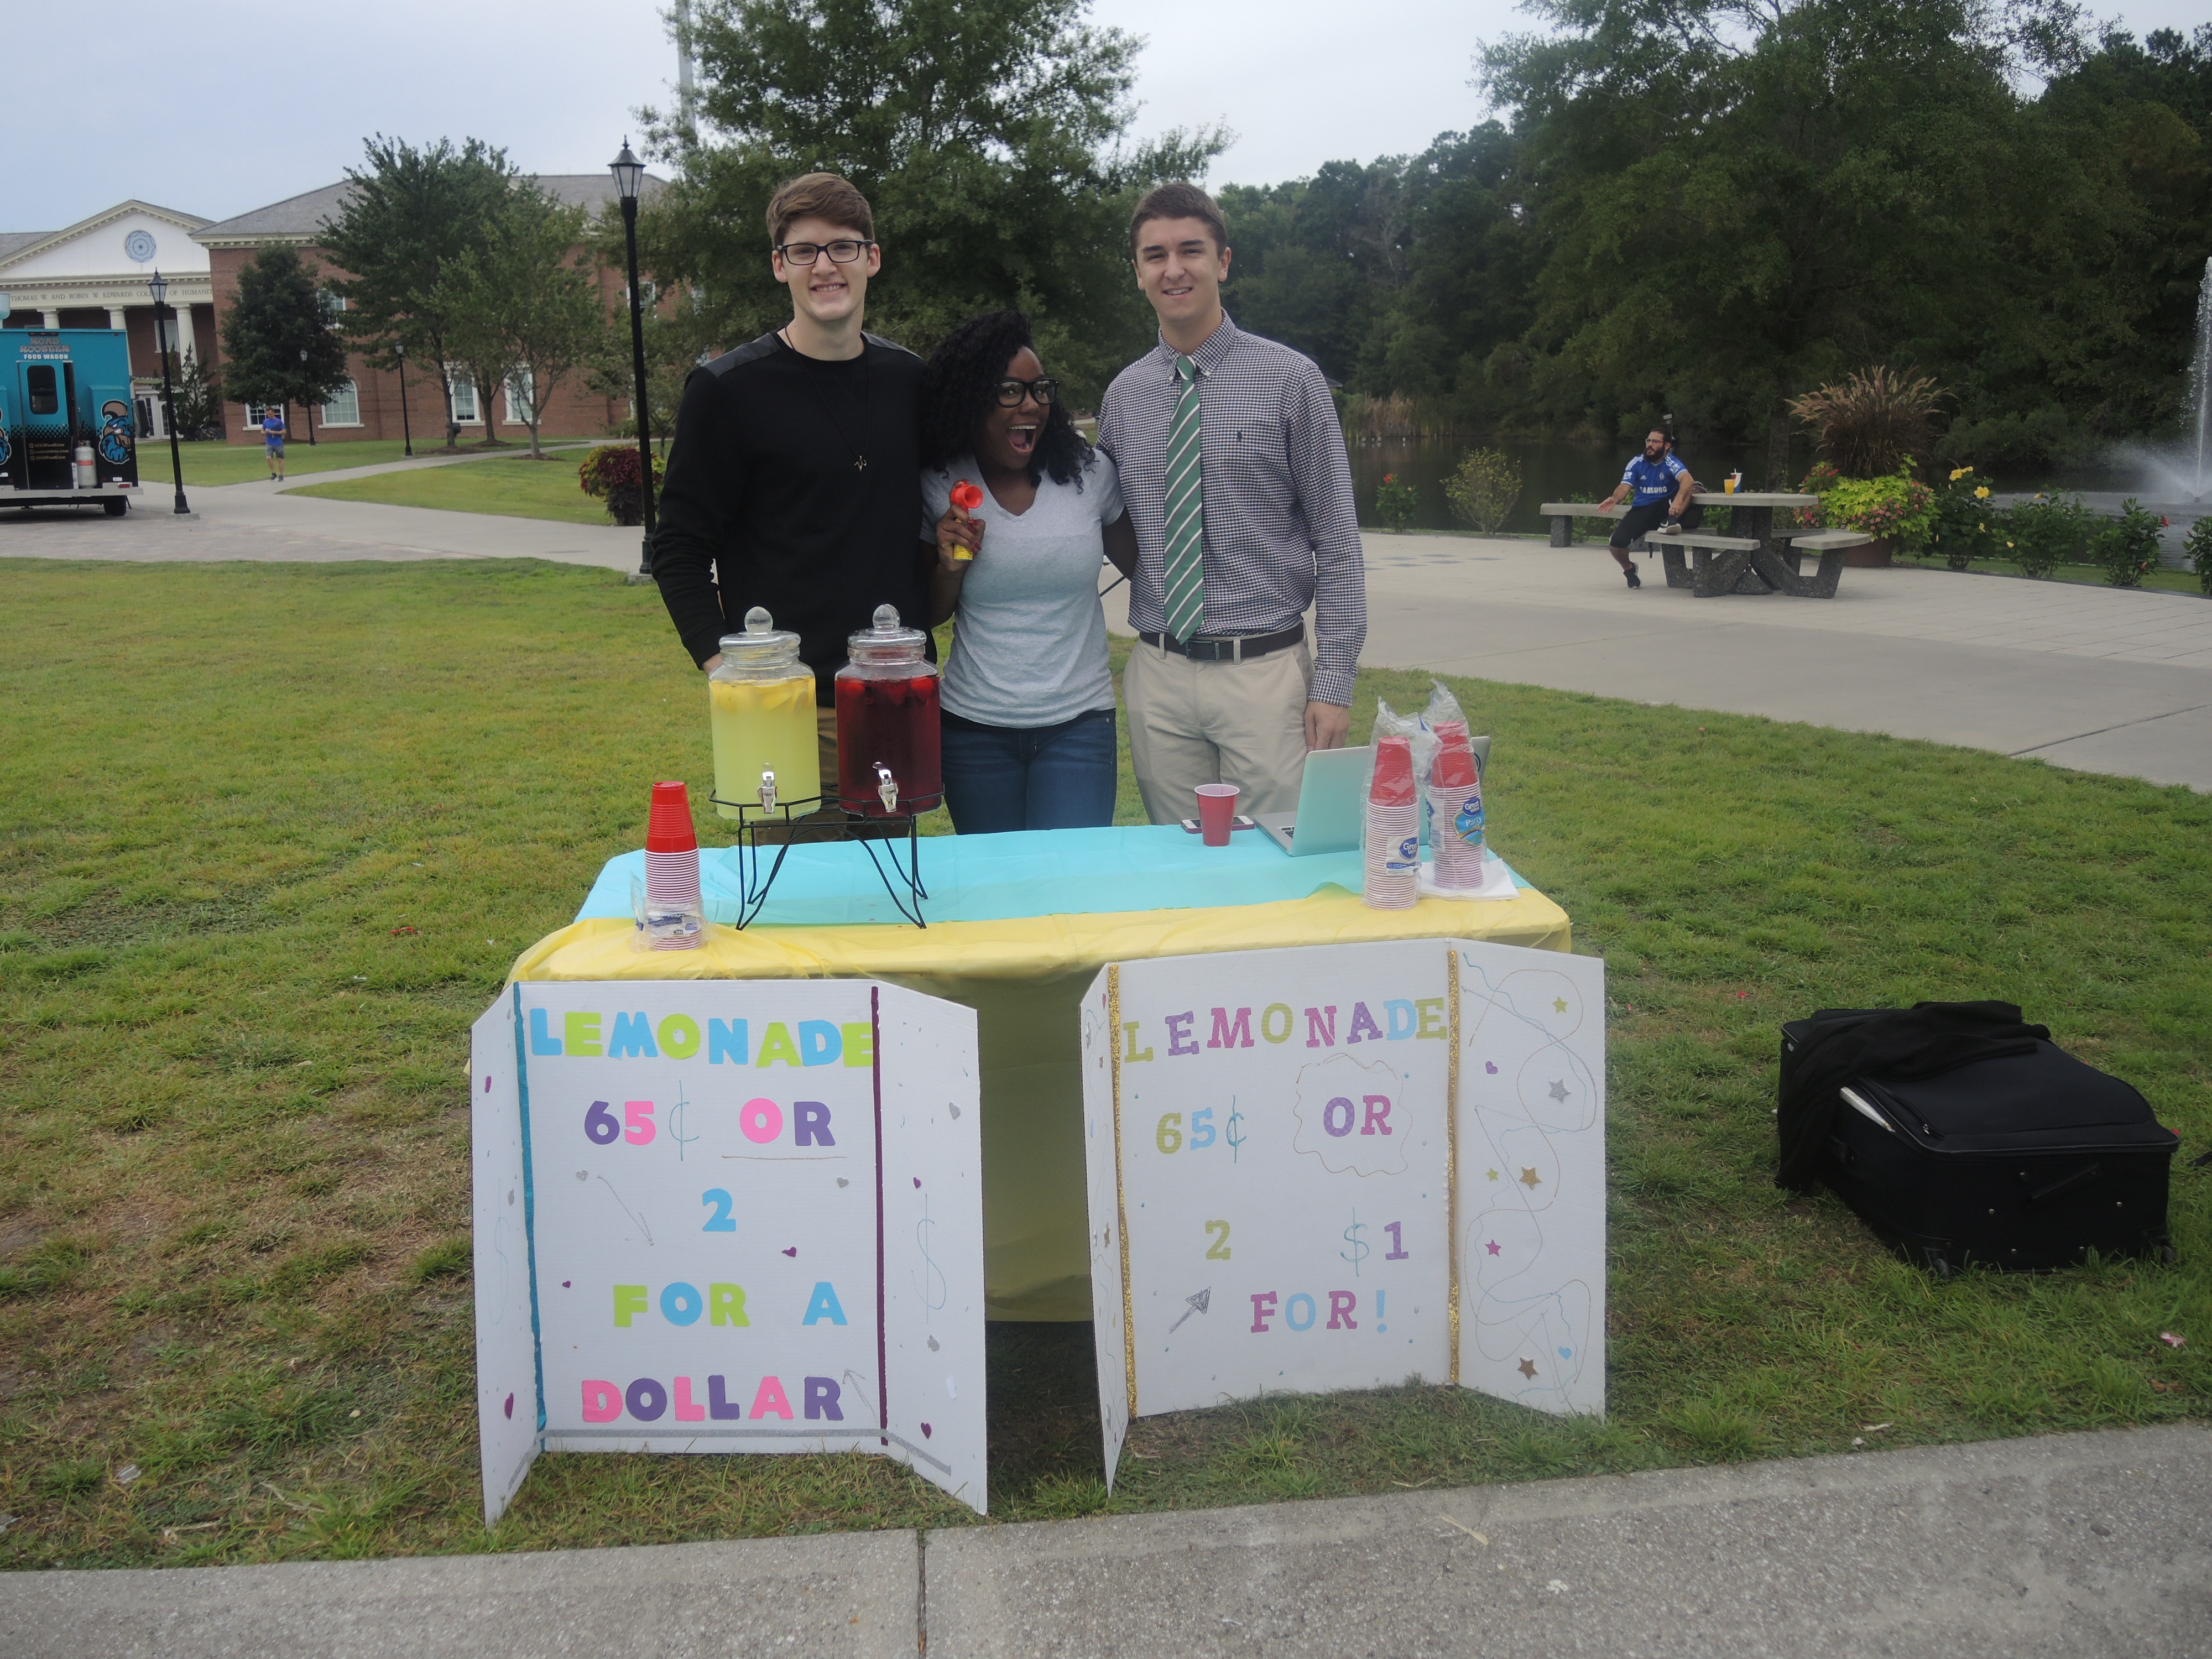 These students used fresh fruit and a strategic location to attract customers to their stand.